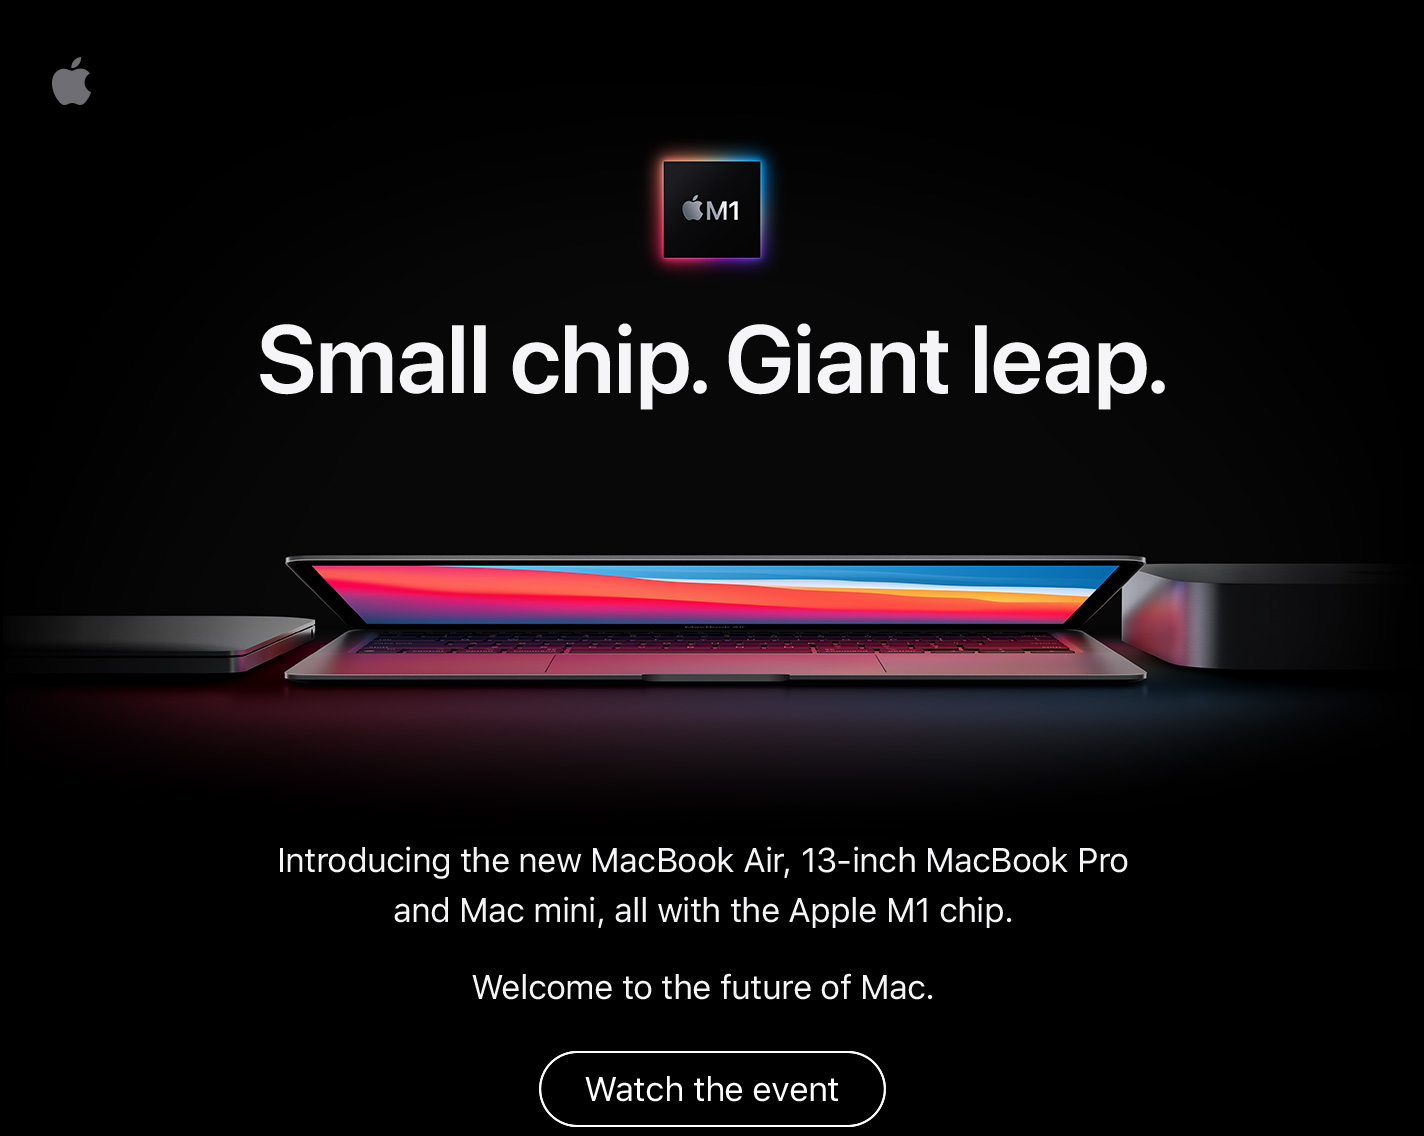 Small chip. Giant leap. Introducing the new MacBook Air, 13-inch MacBook Pro and Mac mini, all with the Apple M1 chip. Watch the event